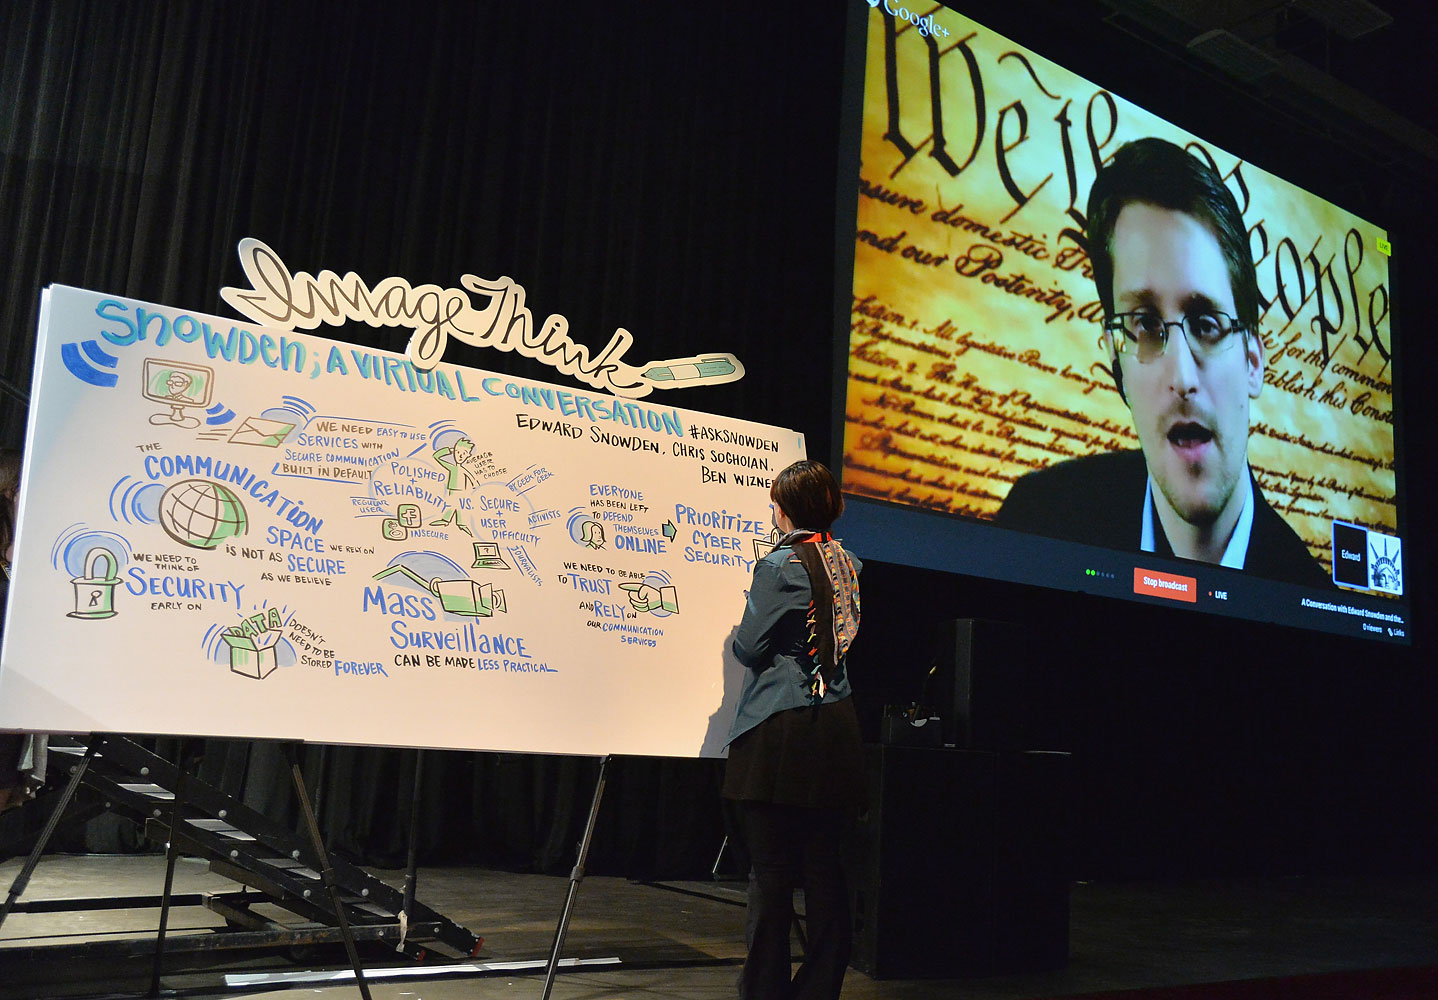 NSA whistleblower Edward Snowden speaks via videoconference at the "Virtual Conversation With Edward Snowden" during the 2014 SXSW Music, Film + Interactive Festival at the Austin Convention Center on March 10, 2014 in Austin. (Michael Buckner—Getty Images for SXSW)